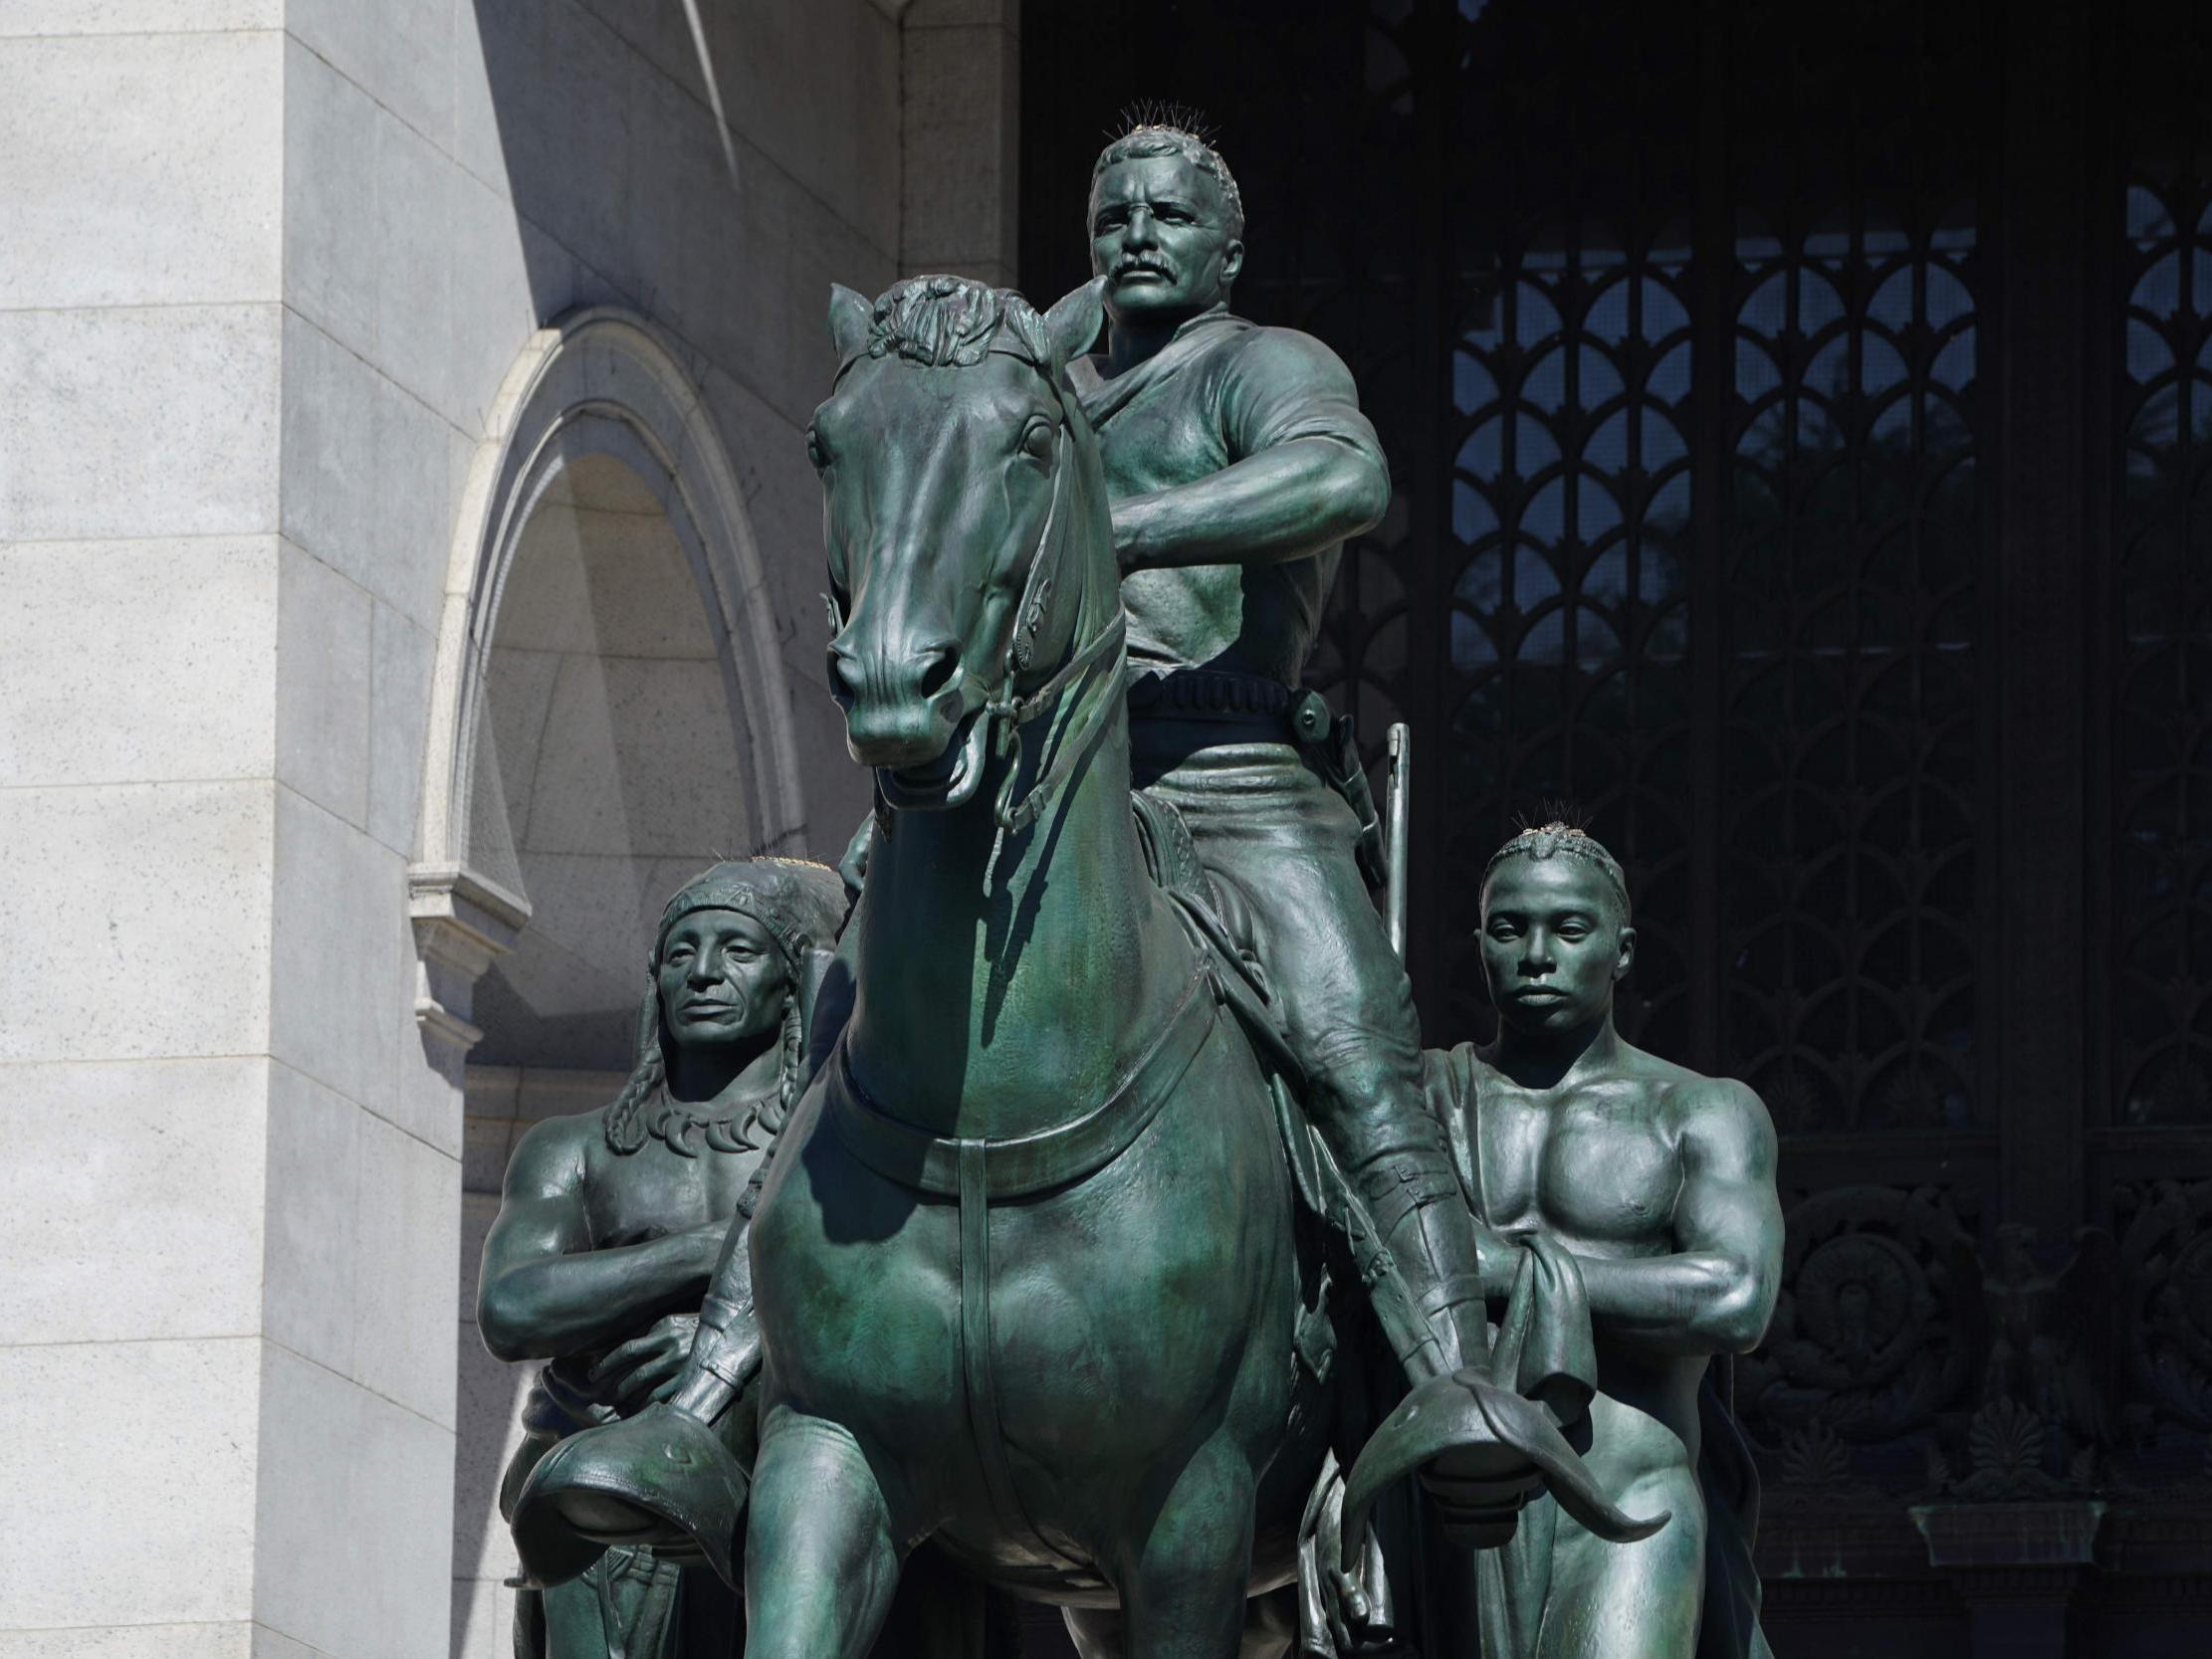 The statue of Roosevelt, at the entrance of the Natural History Museum in New York City, has long been the subject of calls for removal